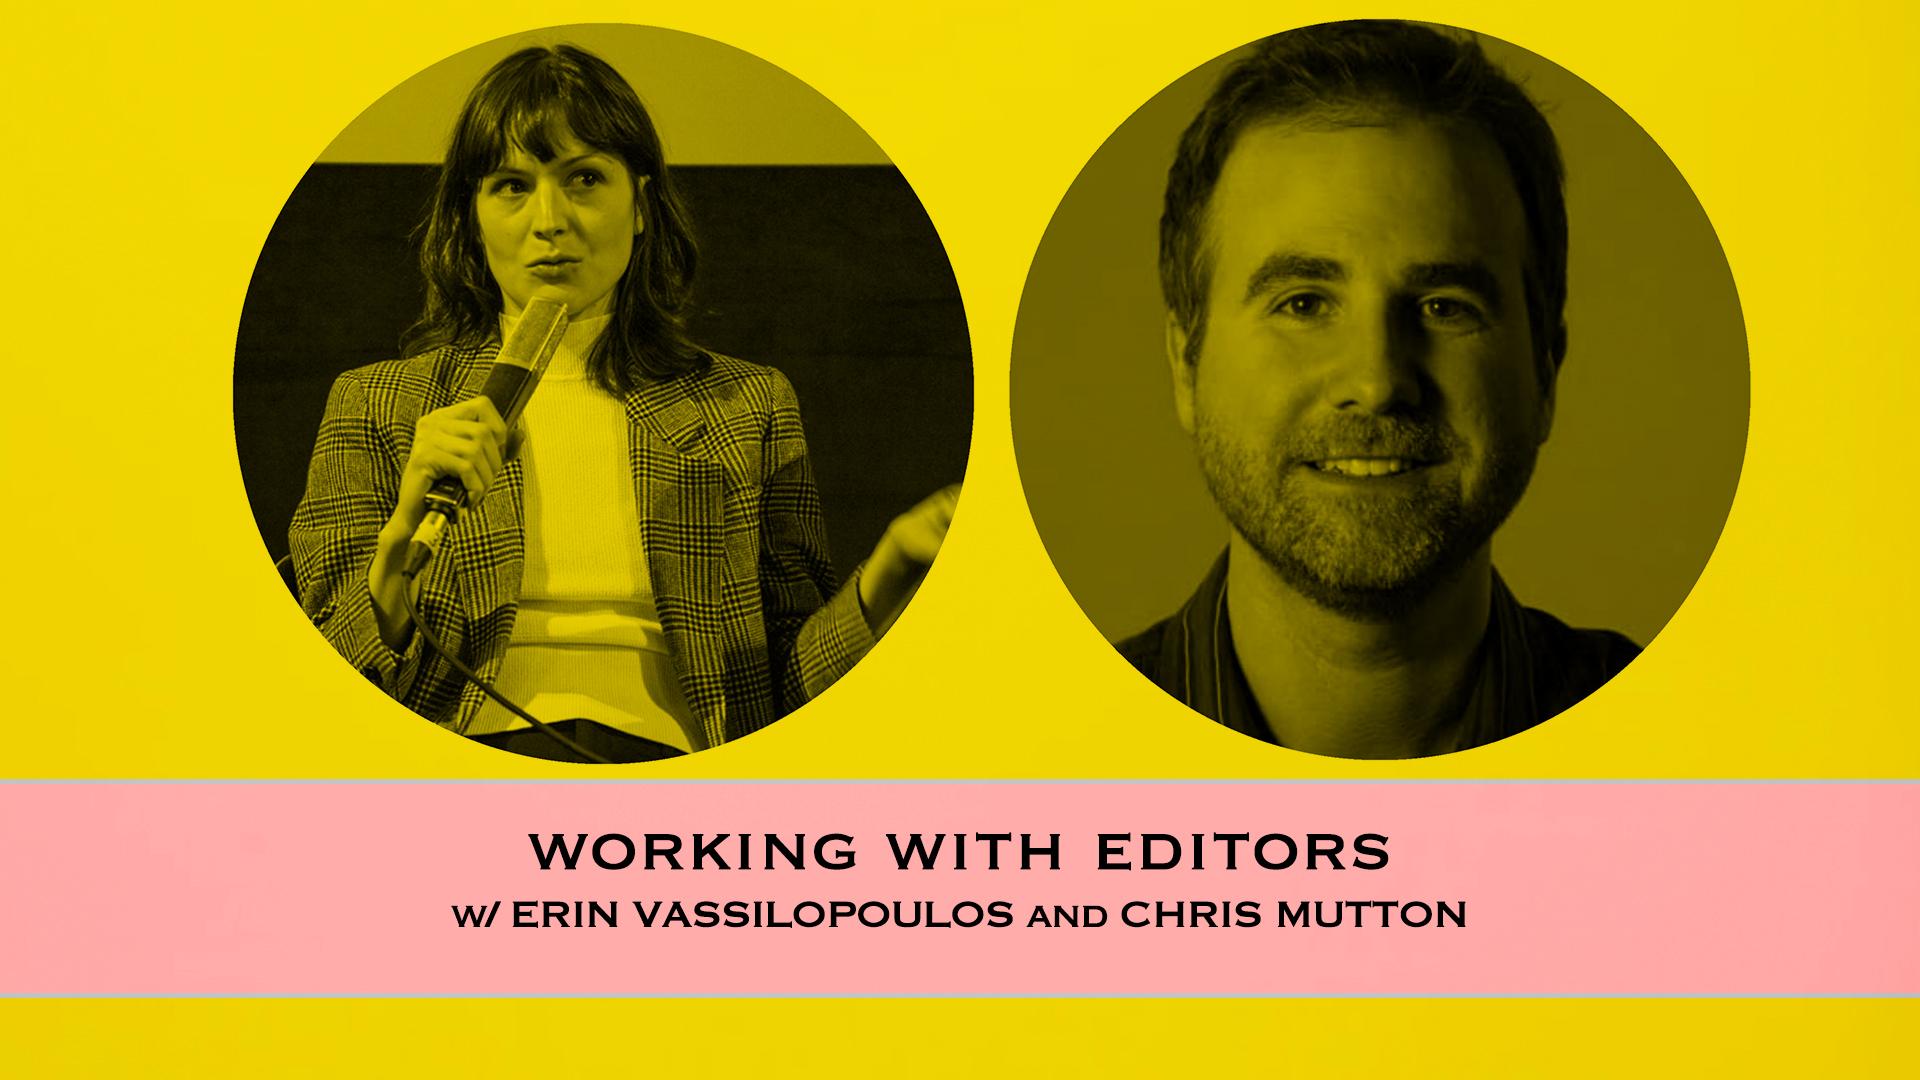 Working with Cinema Editors Panel with Erin Vassilopoulos and Chris Mutton